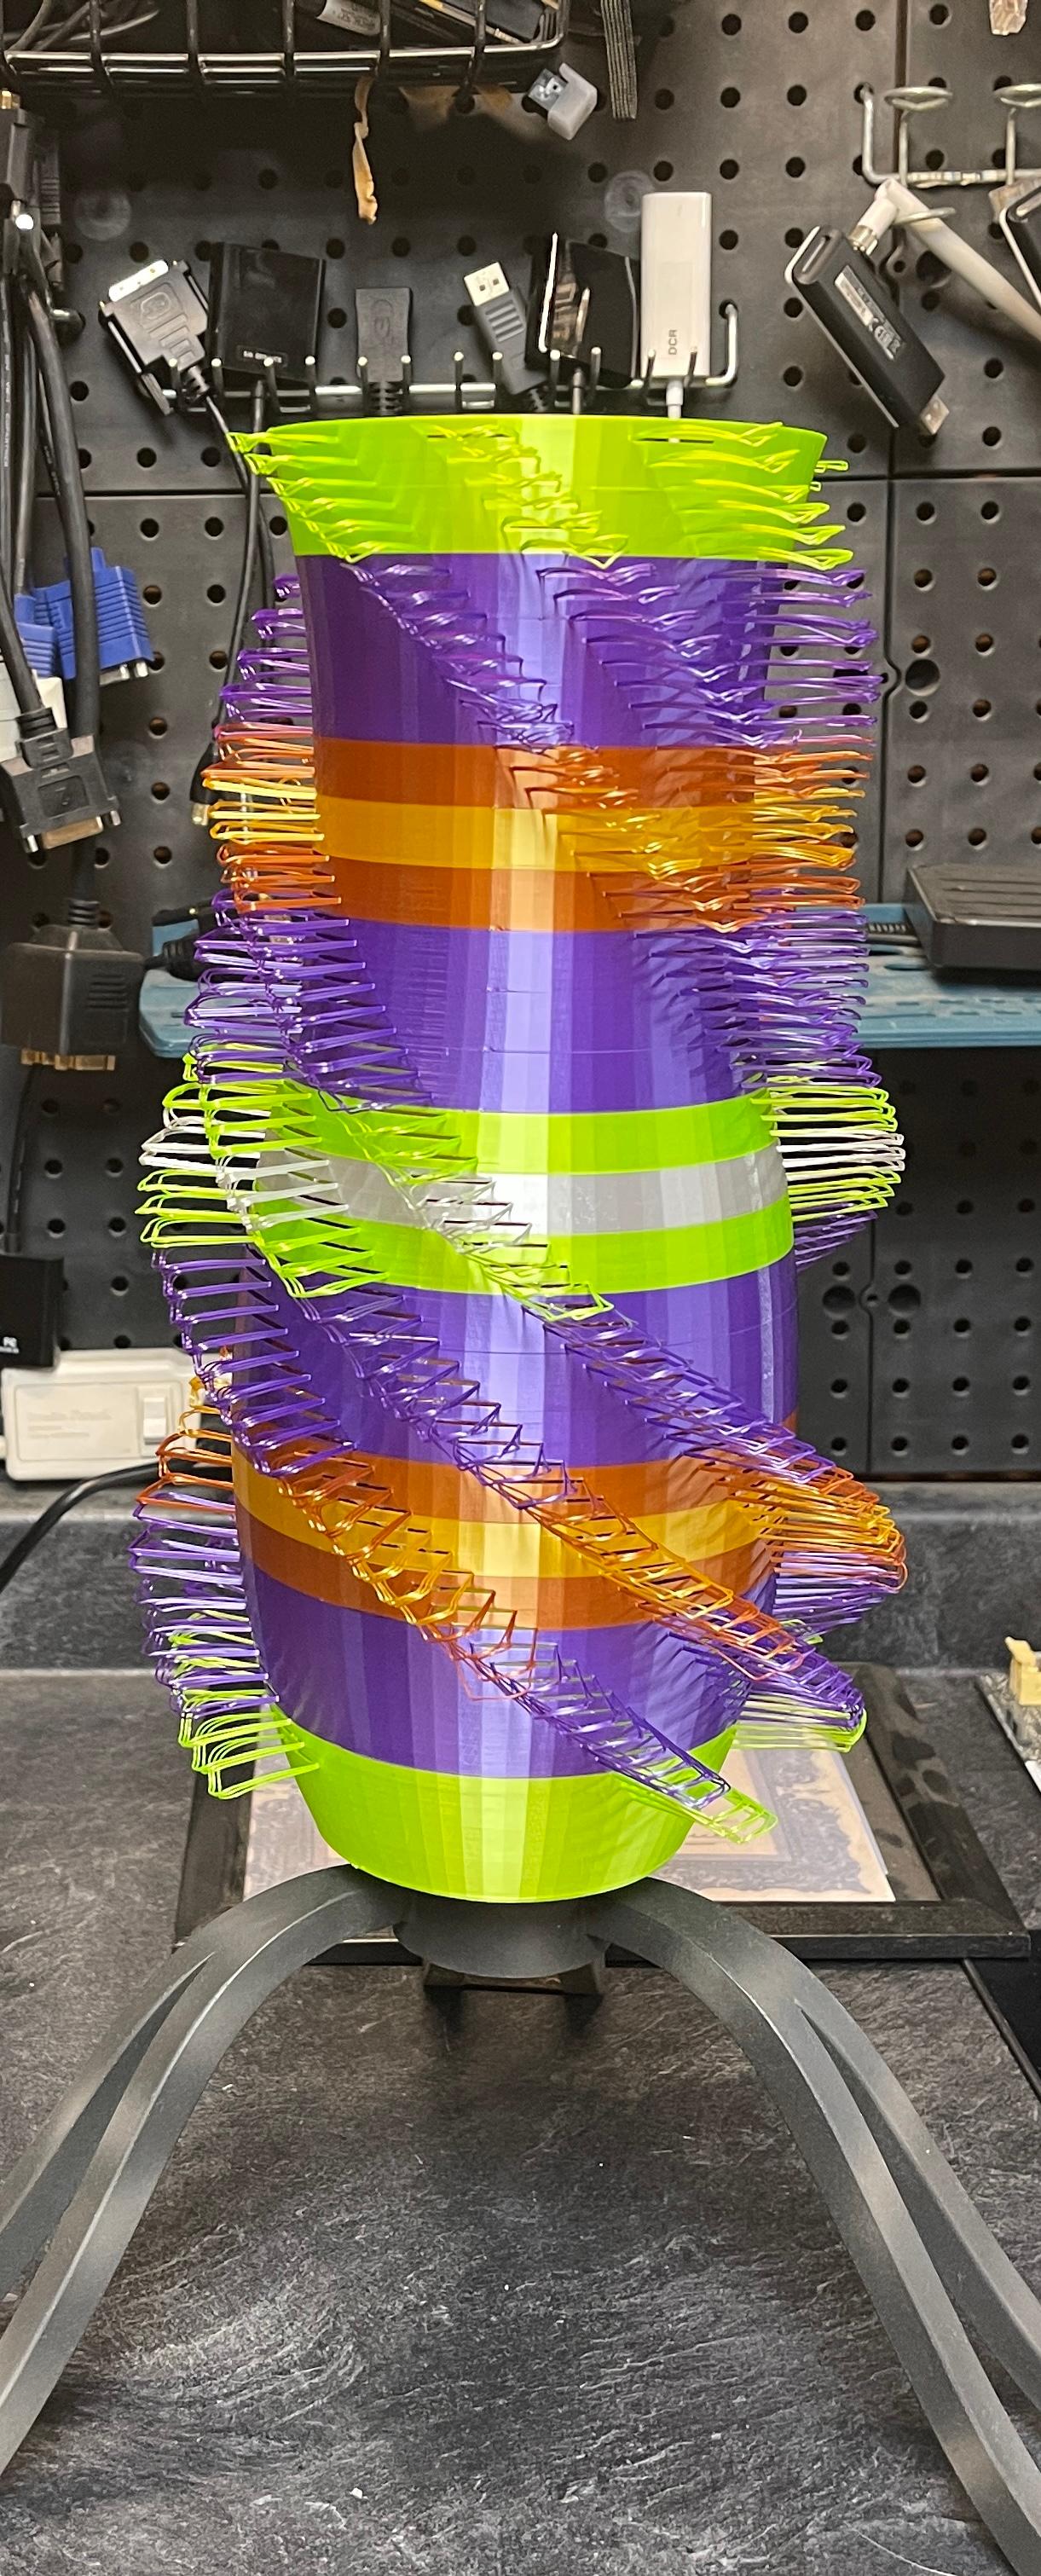 Triple twist vase - Chose to slow way down, lower temp @low flow for more stair-like loops. Love the designs as always!! - 3d model